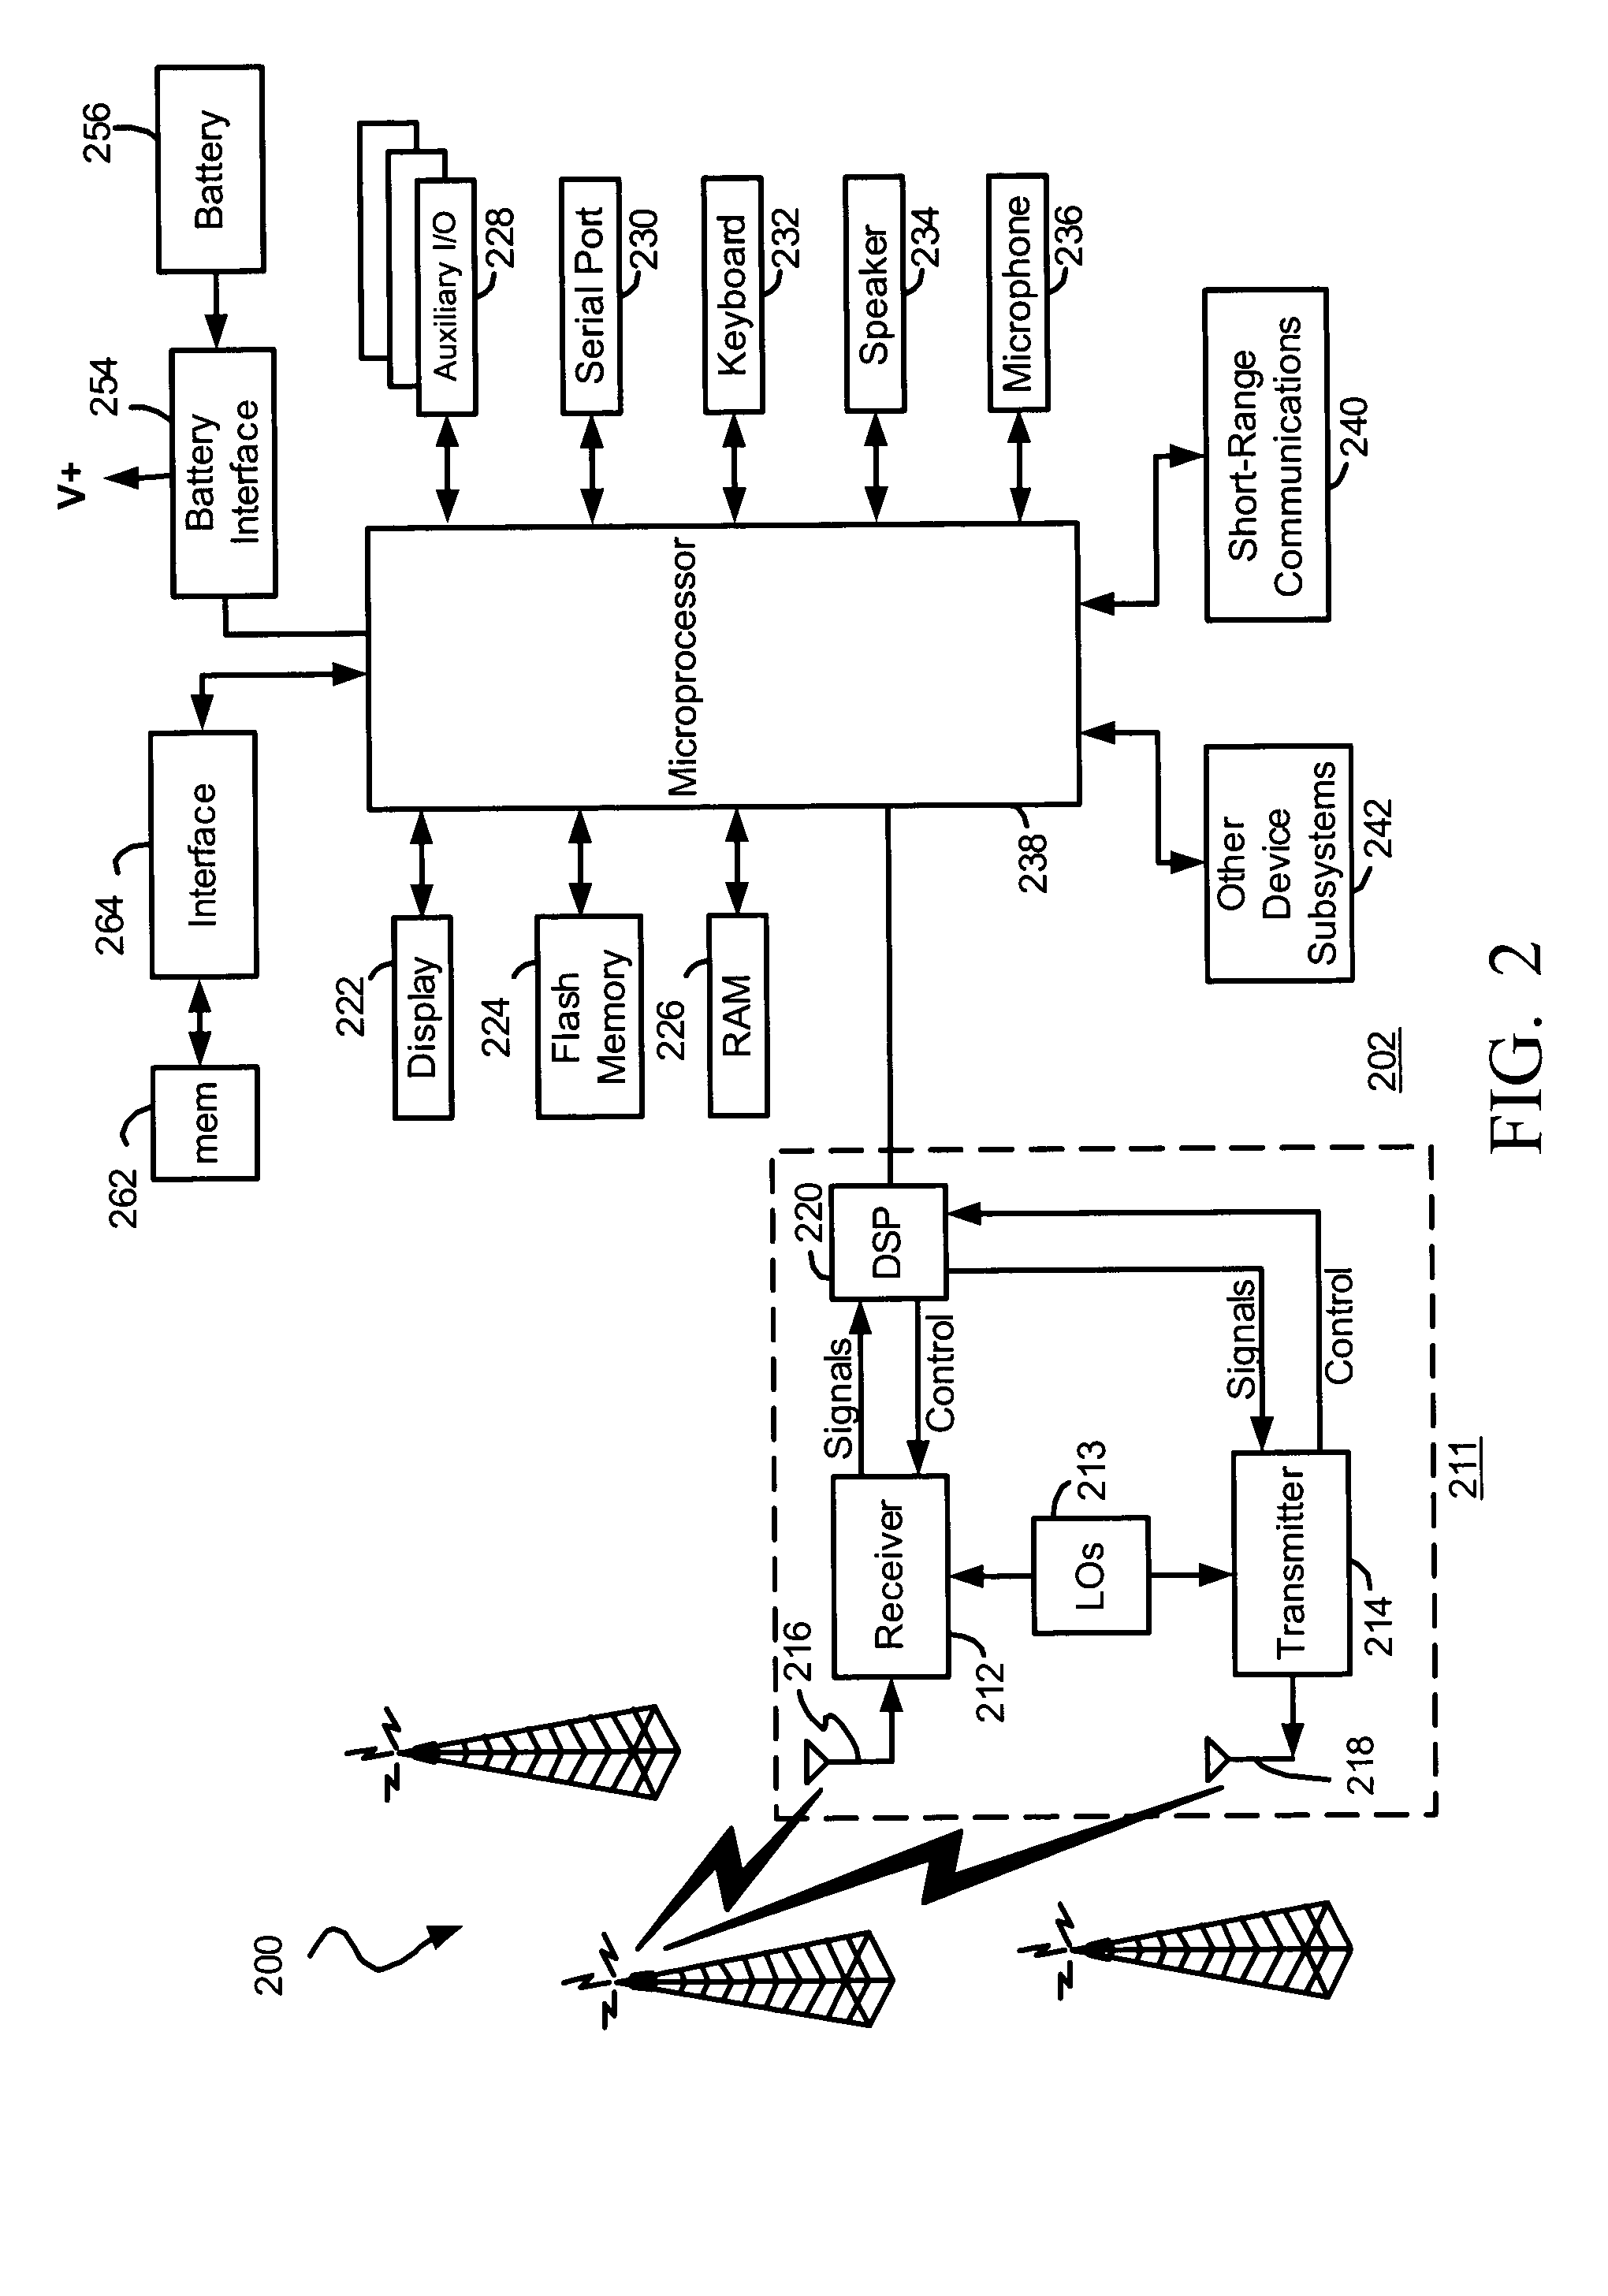 Methods and apparatus for selecting a wireless network based on quality of service (QoS) criteria associated with an application